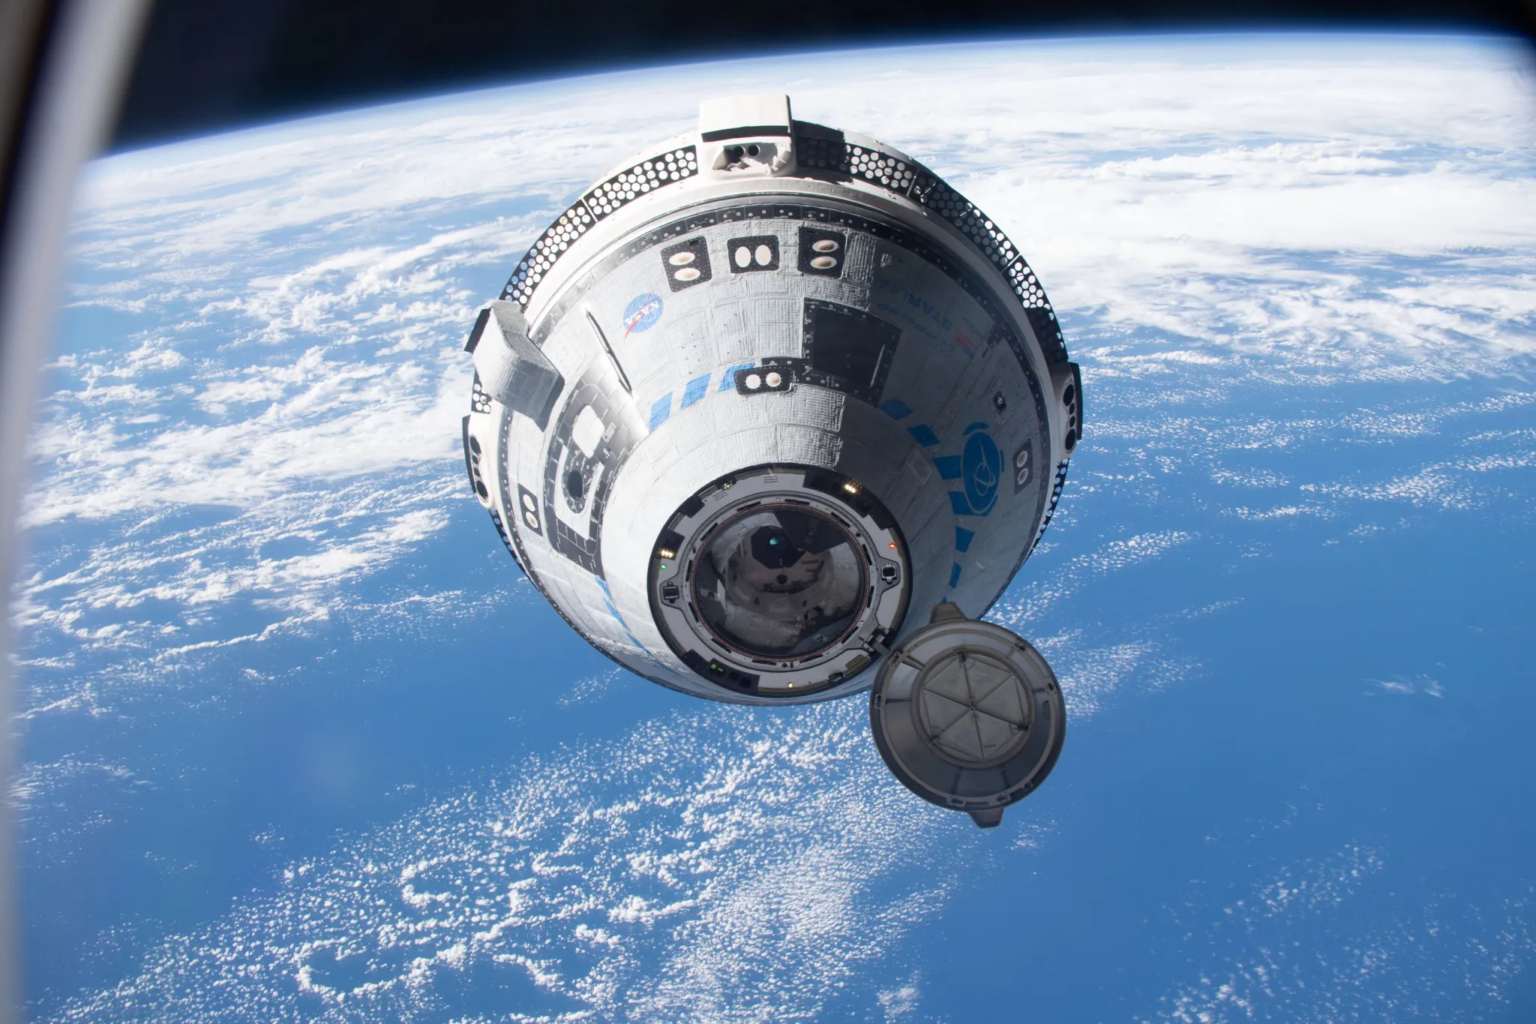 Boeing Starliner Commercial Crew Module deemed safe to return astronauts to Earth for emergency return as engineers diagnose anomalies.